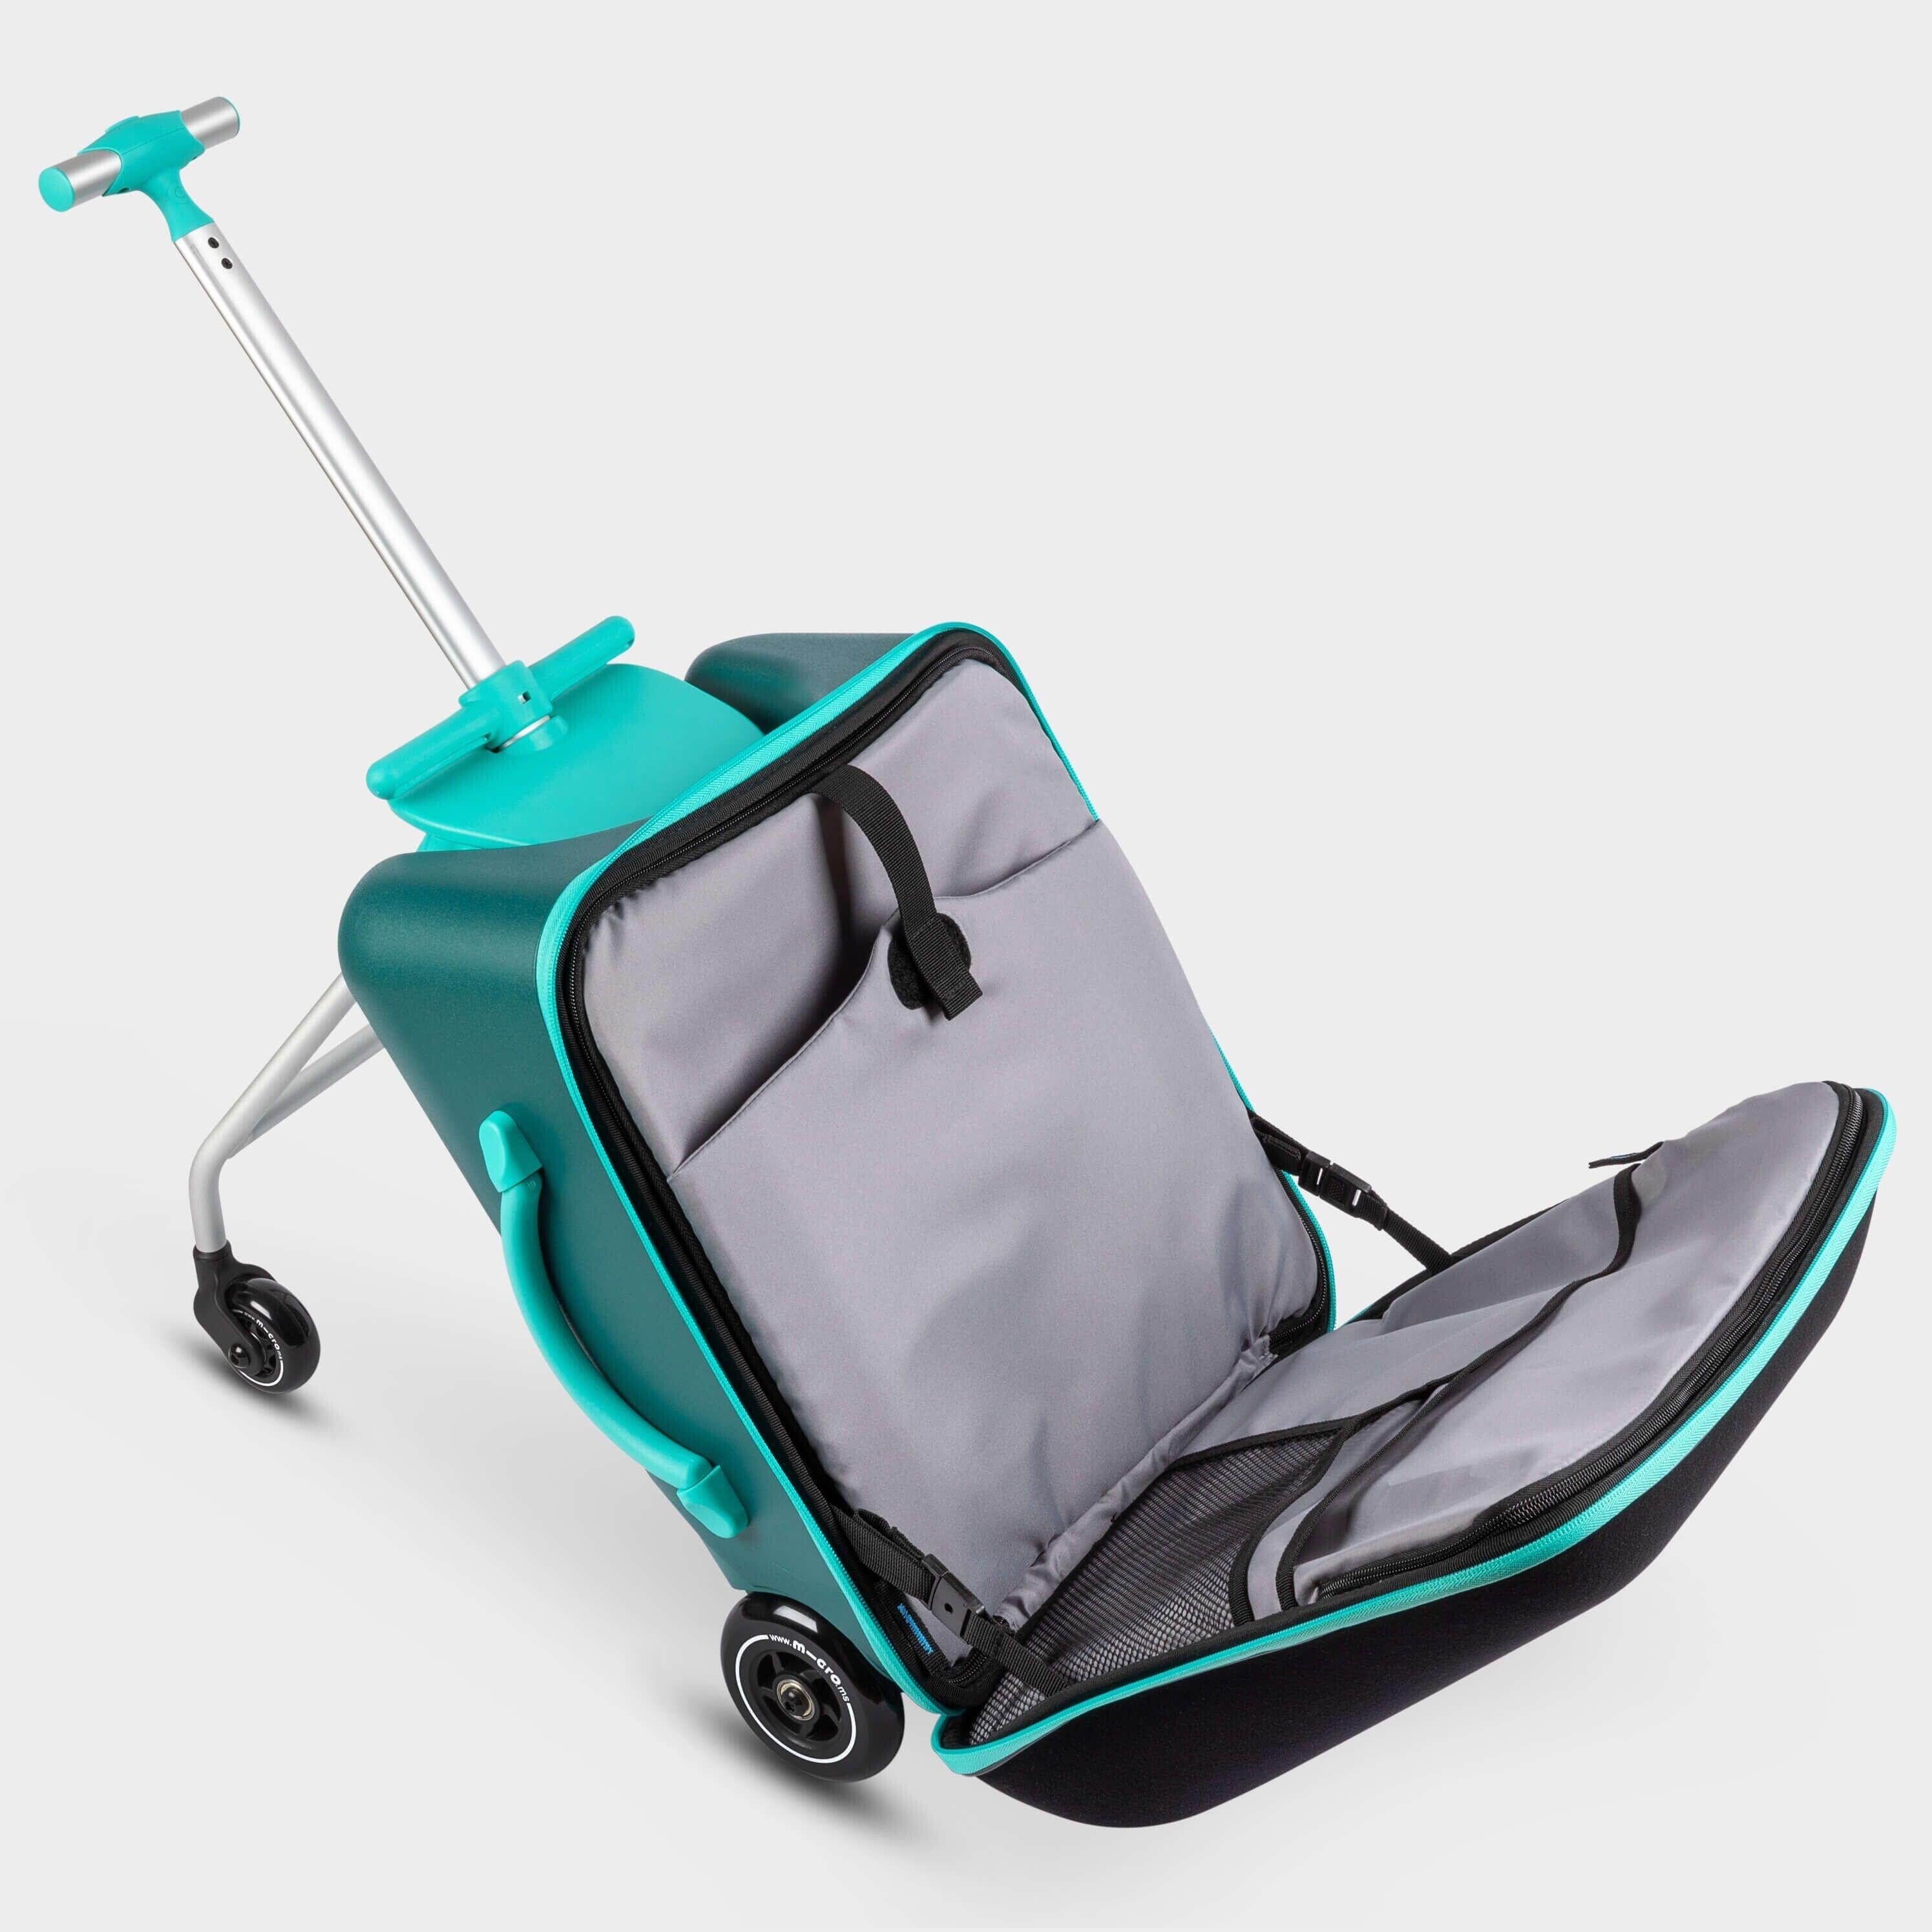 Micro Luggage Trike Scooter: Teal Green 5/7